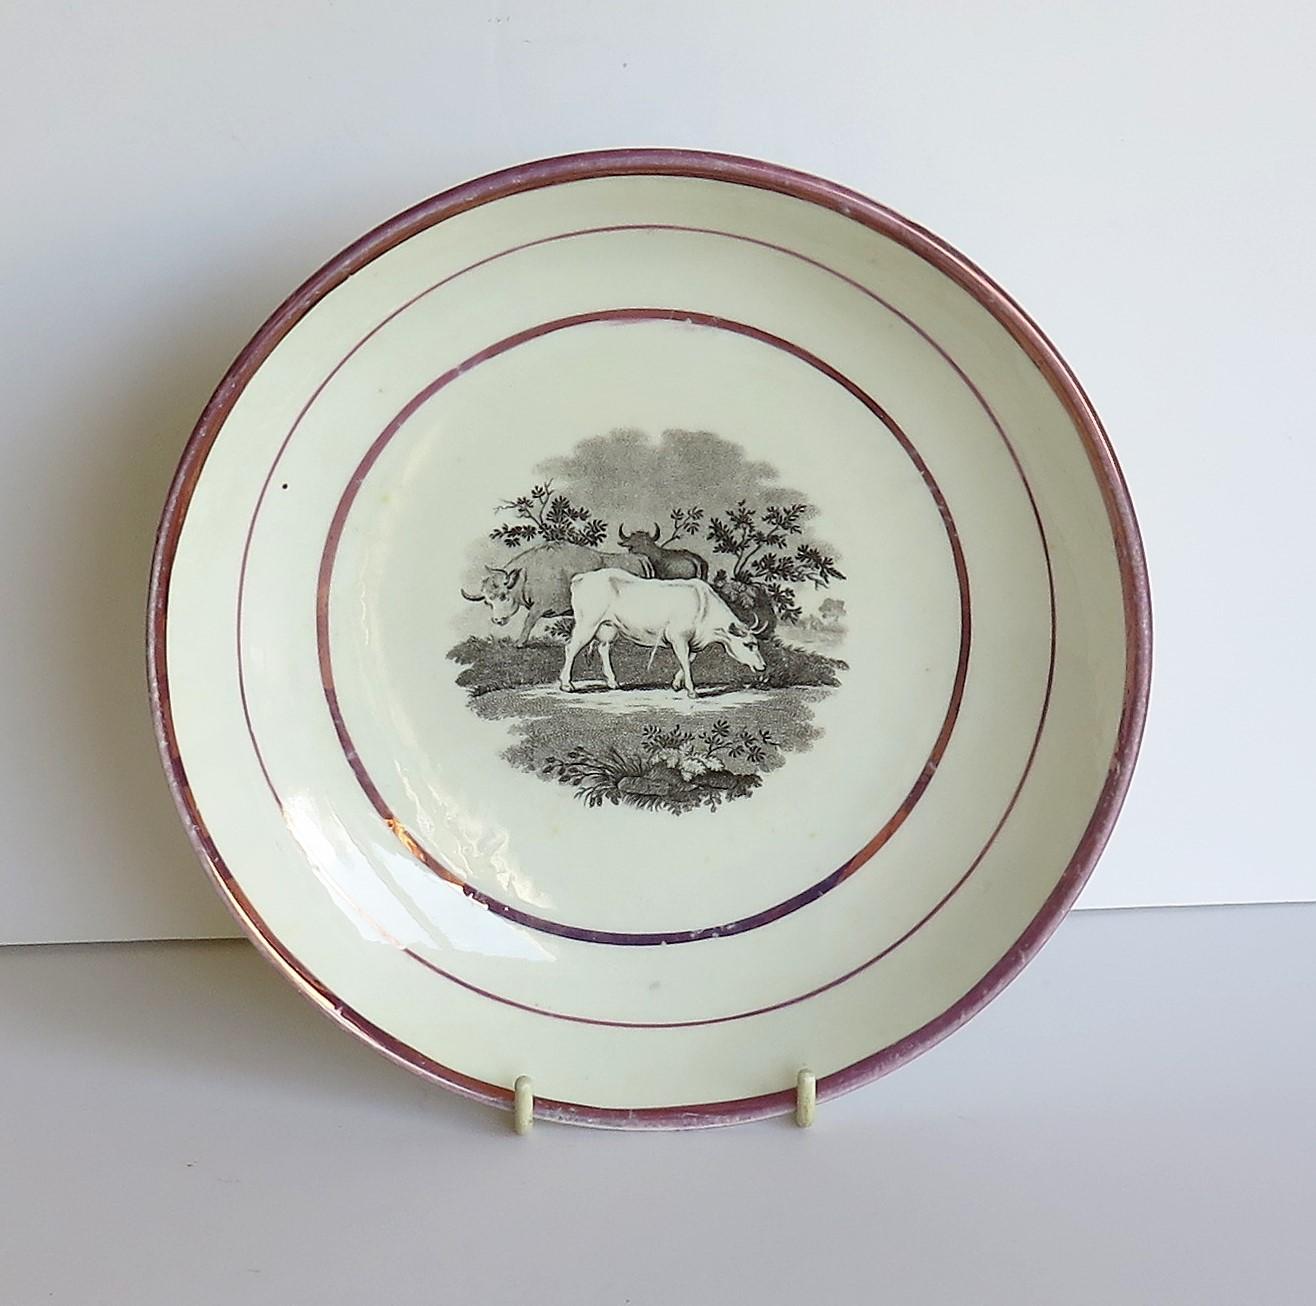 This is a good porcelain Sunderland pink lustre dish or deep plate from early in the 19th century, George III period, circa 1810-1820.

The dish is decorated with a bat printed scene of three grazing cattle or cows in a country setting by some